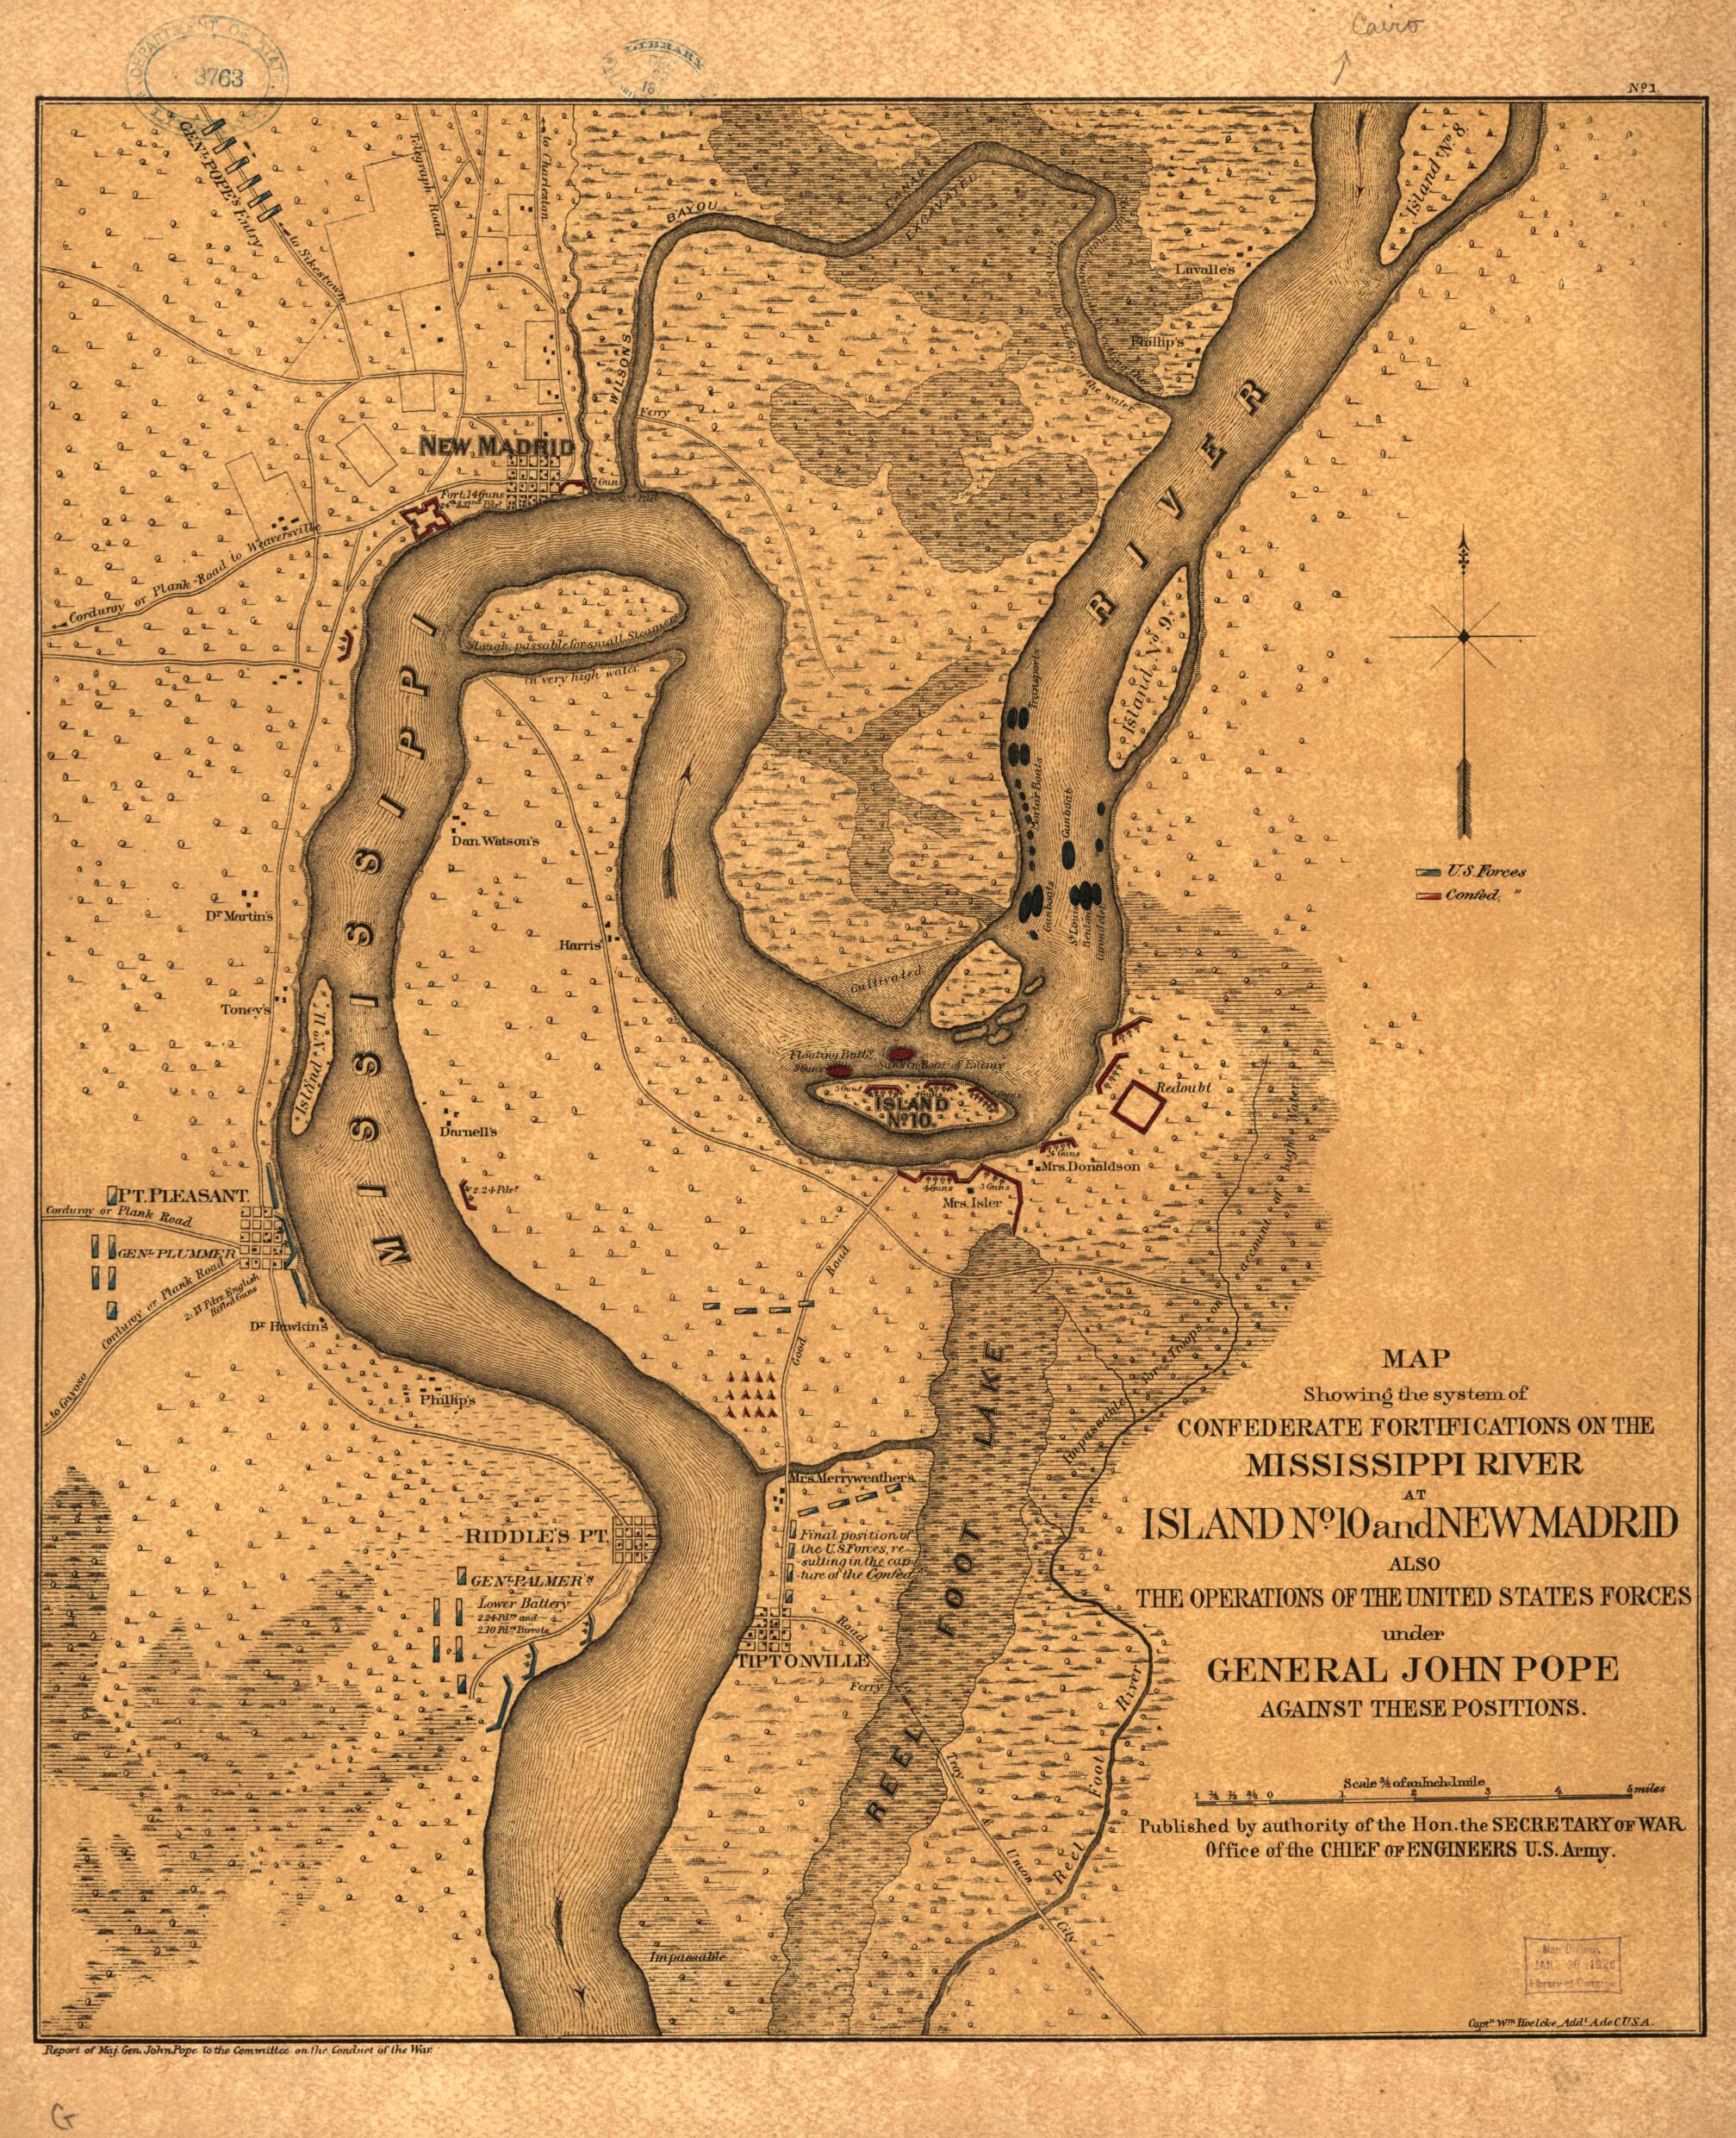 This old map of Map Showing the System of Confederate Fortifications On the Mississippi River at Island No. 10 and New Madrid, Also the Operations of the United States Forces Under General John Pope Against These Positions from 1862 was created by Wm Hoe